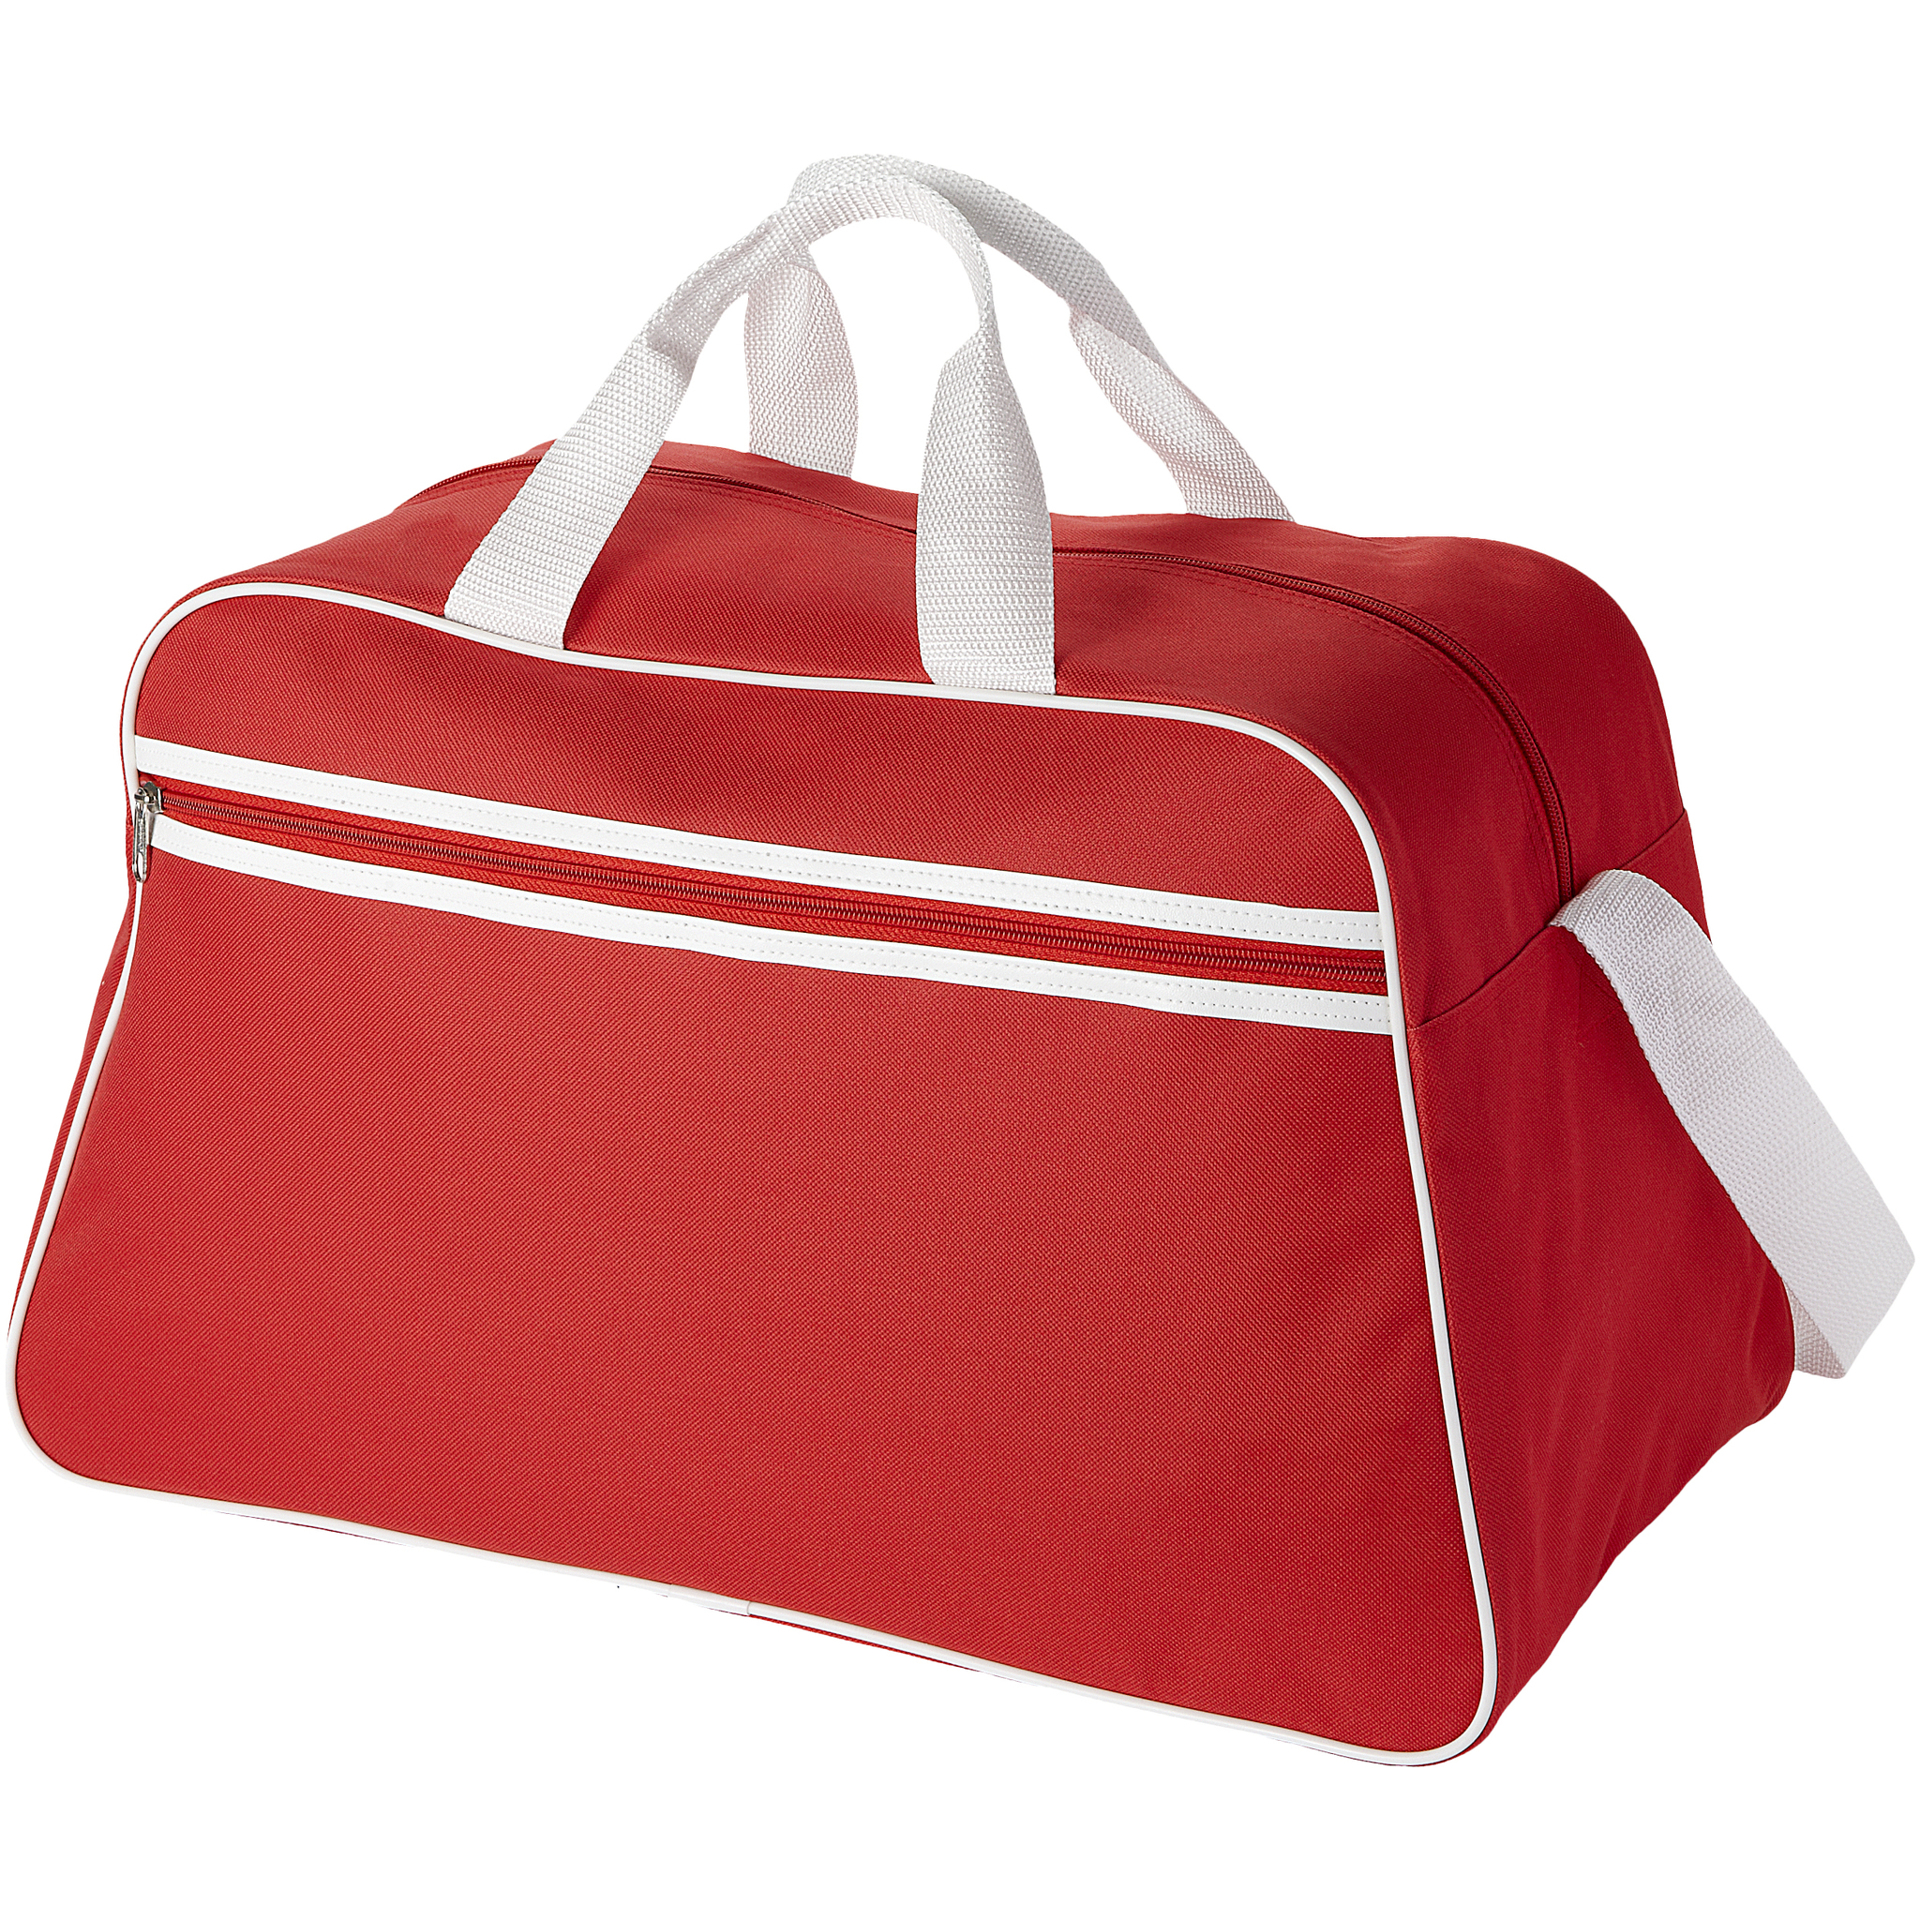 San Jose Sports Bag in red and white